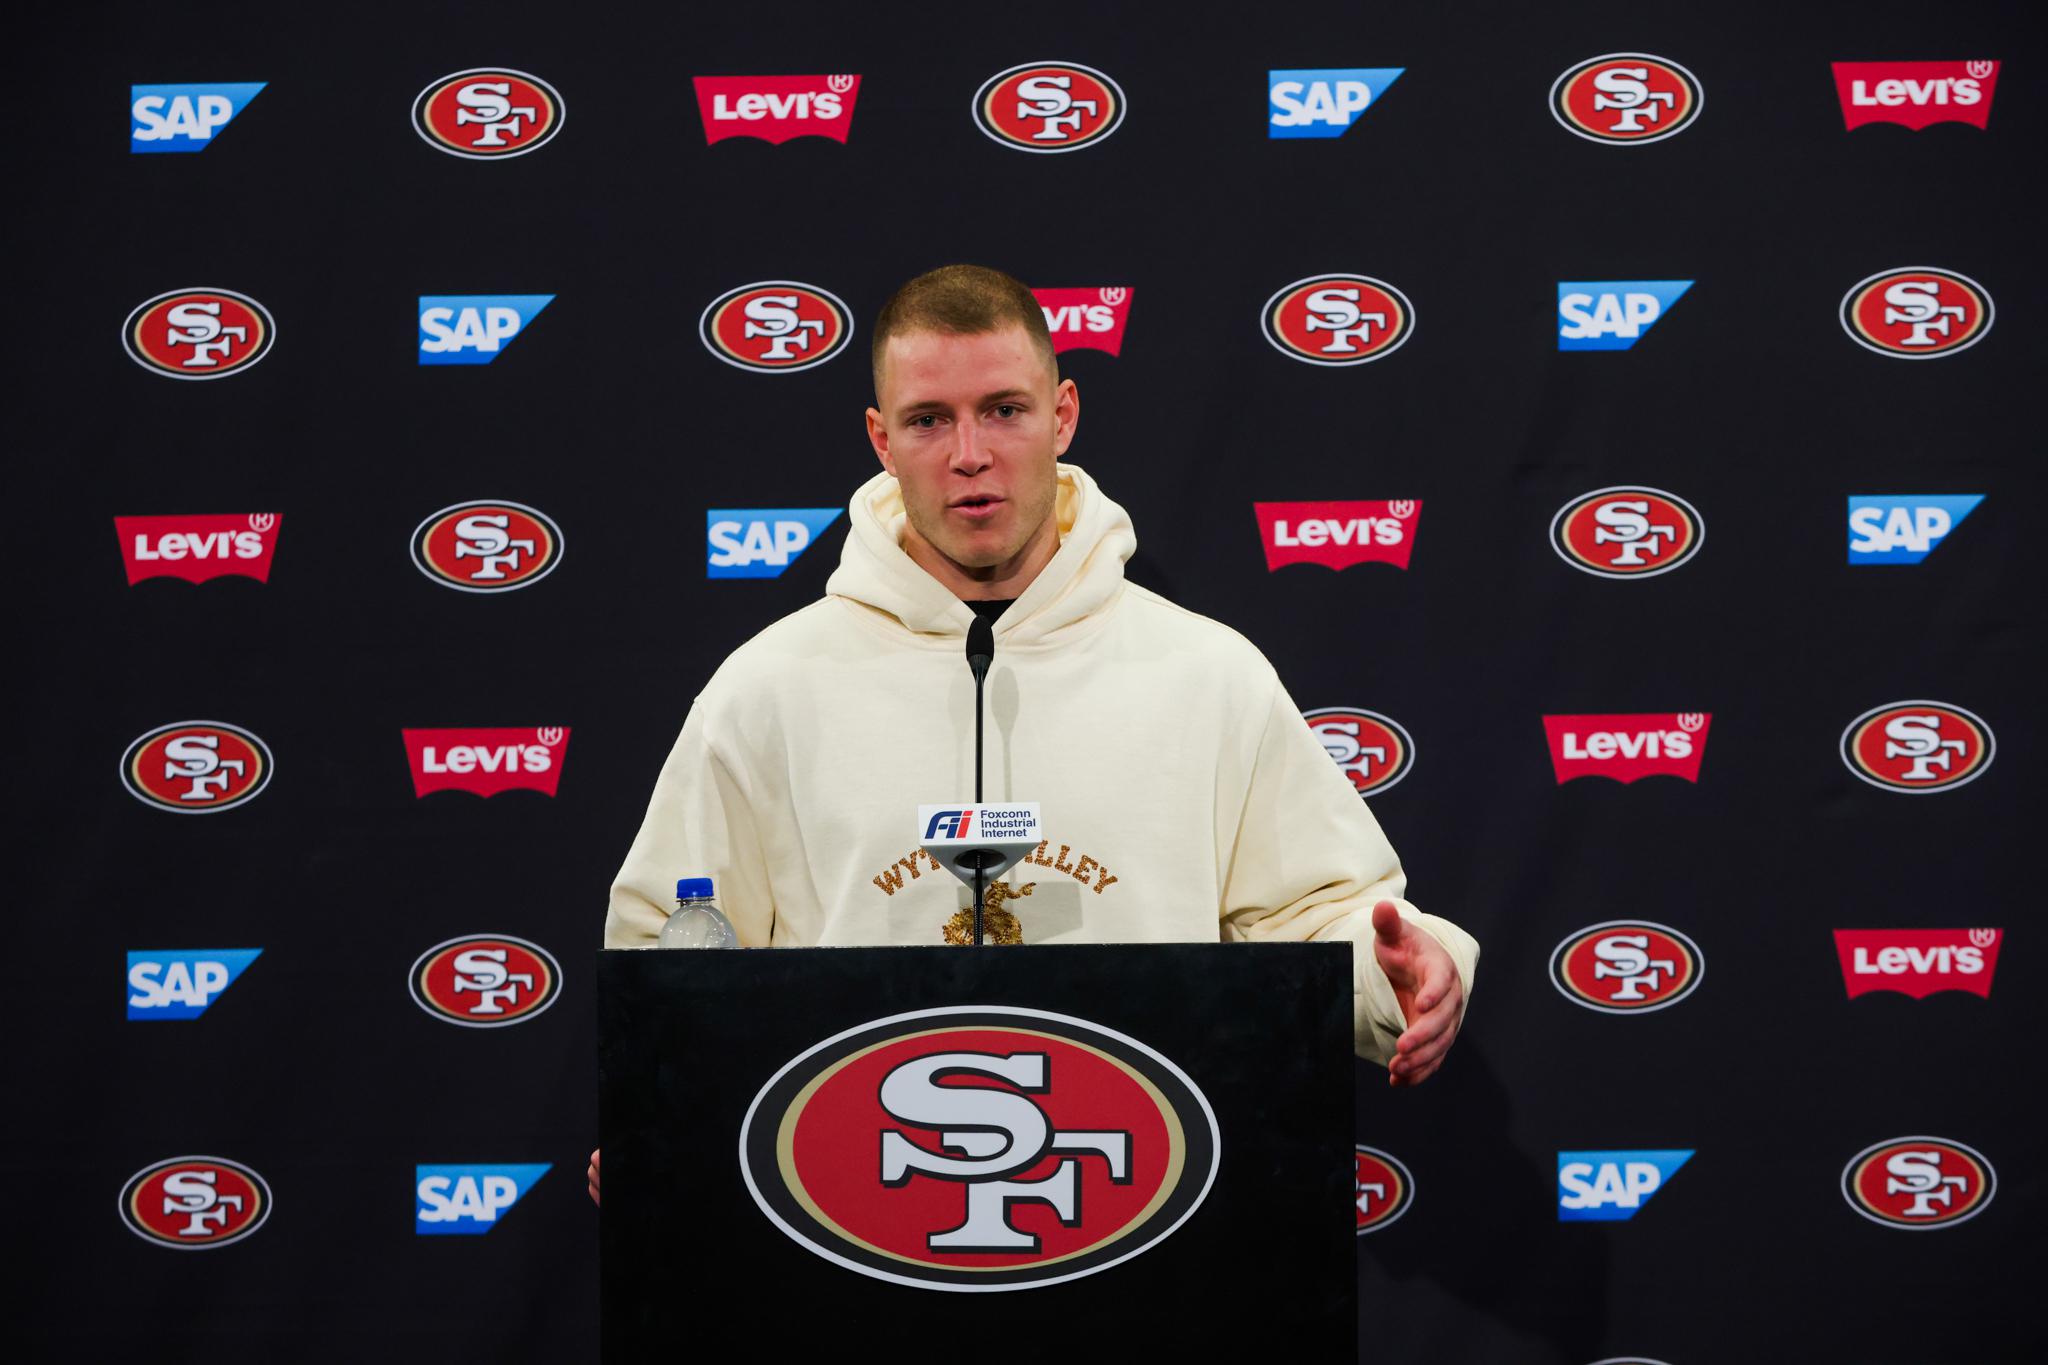 No overstating it, 49ers' gamble on McCaffrey has Super Bowl-size stakes